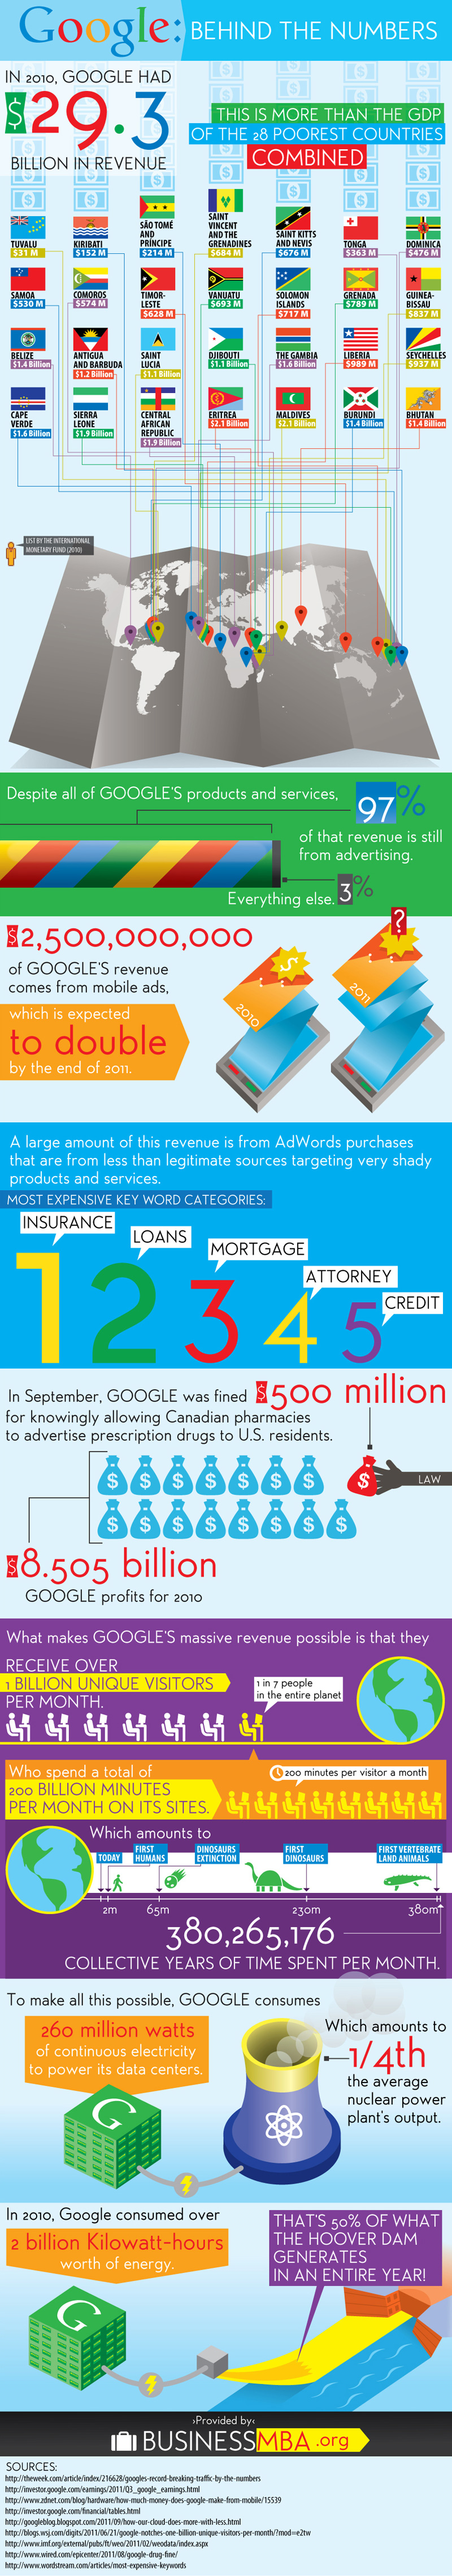 Google facts infographic